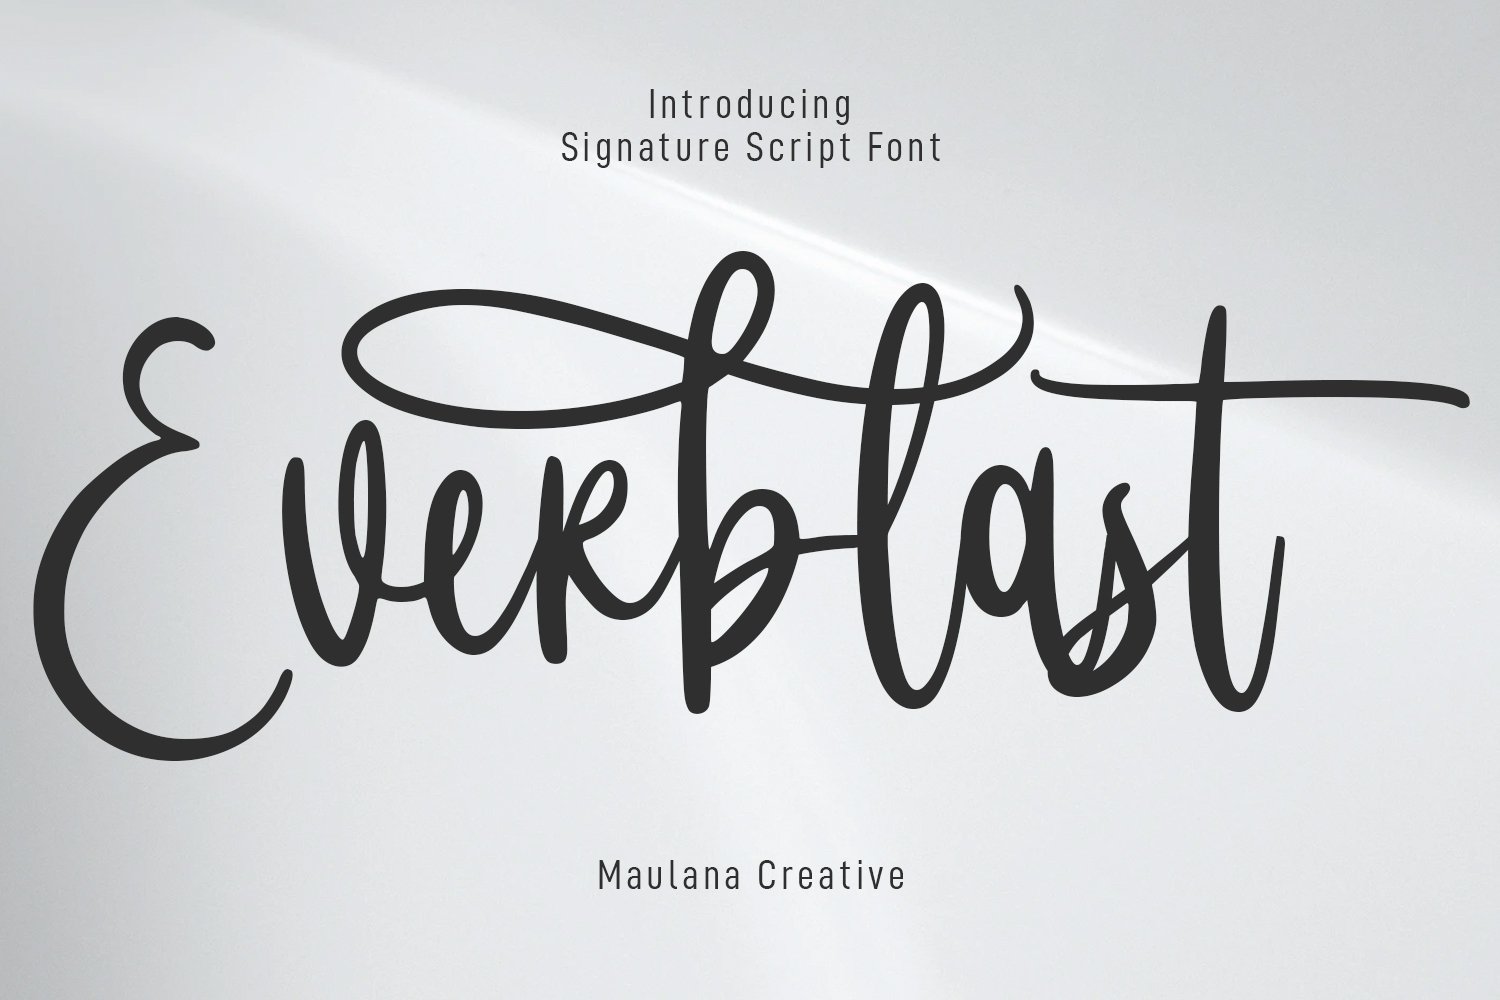 Everblast Calligraphy Script Font cover image.